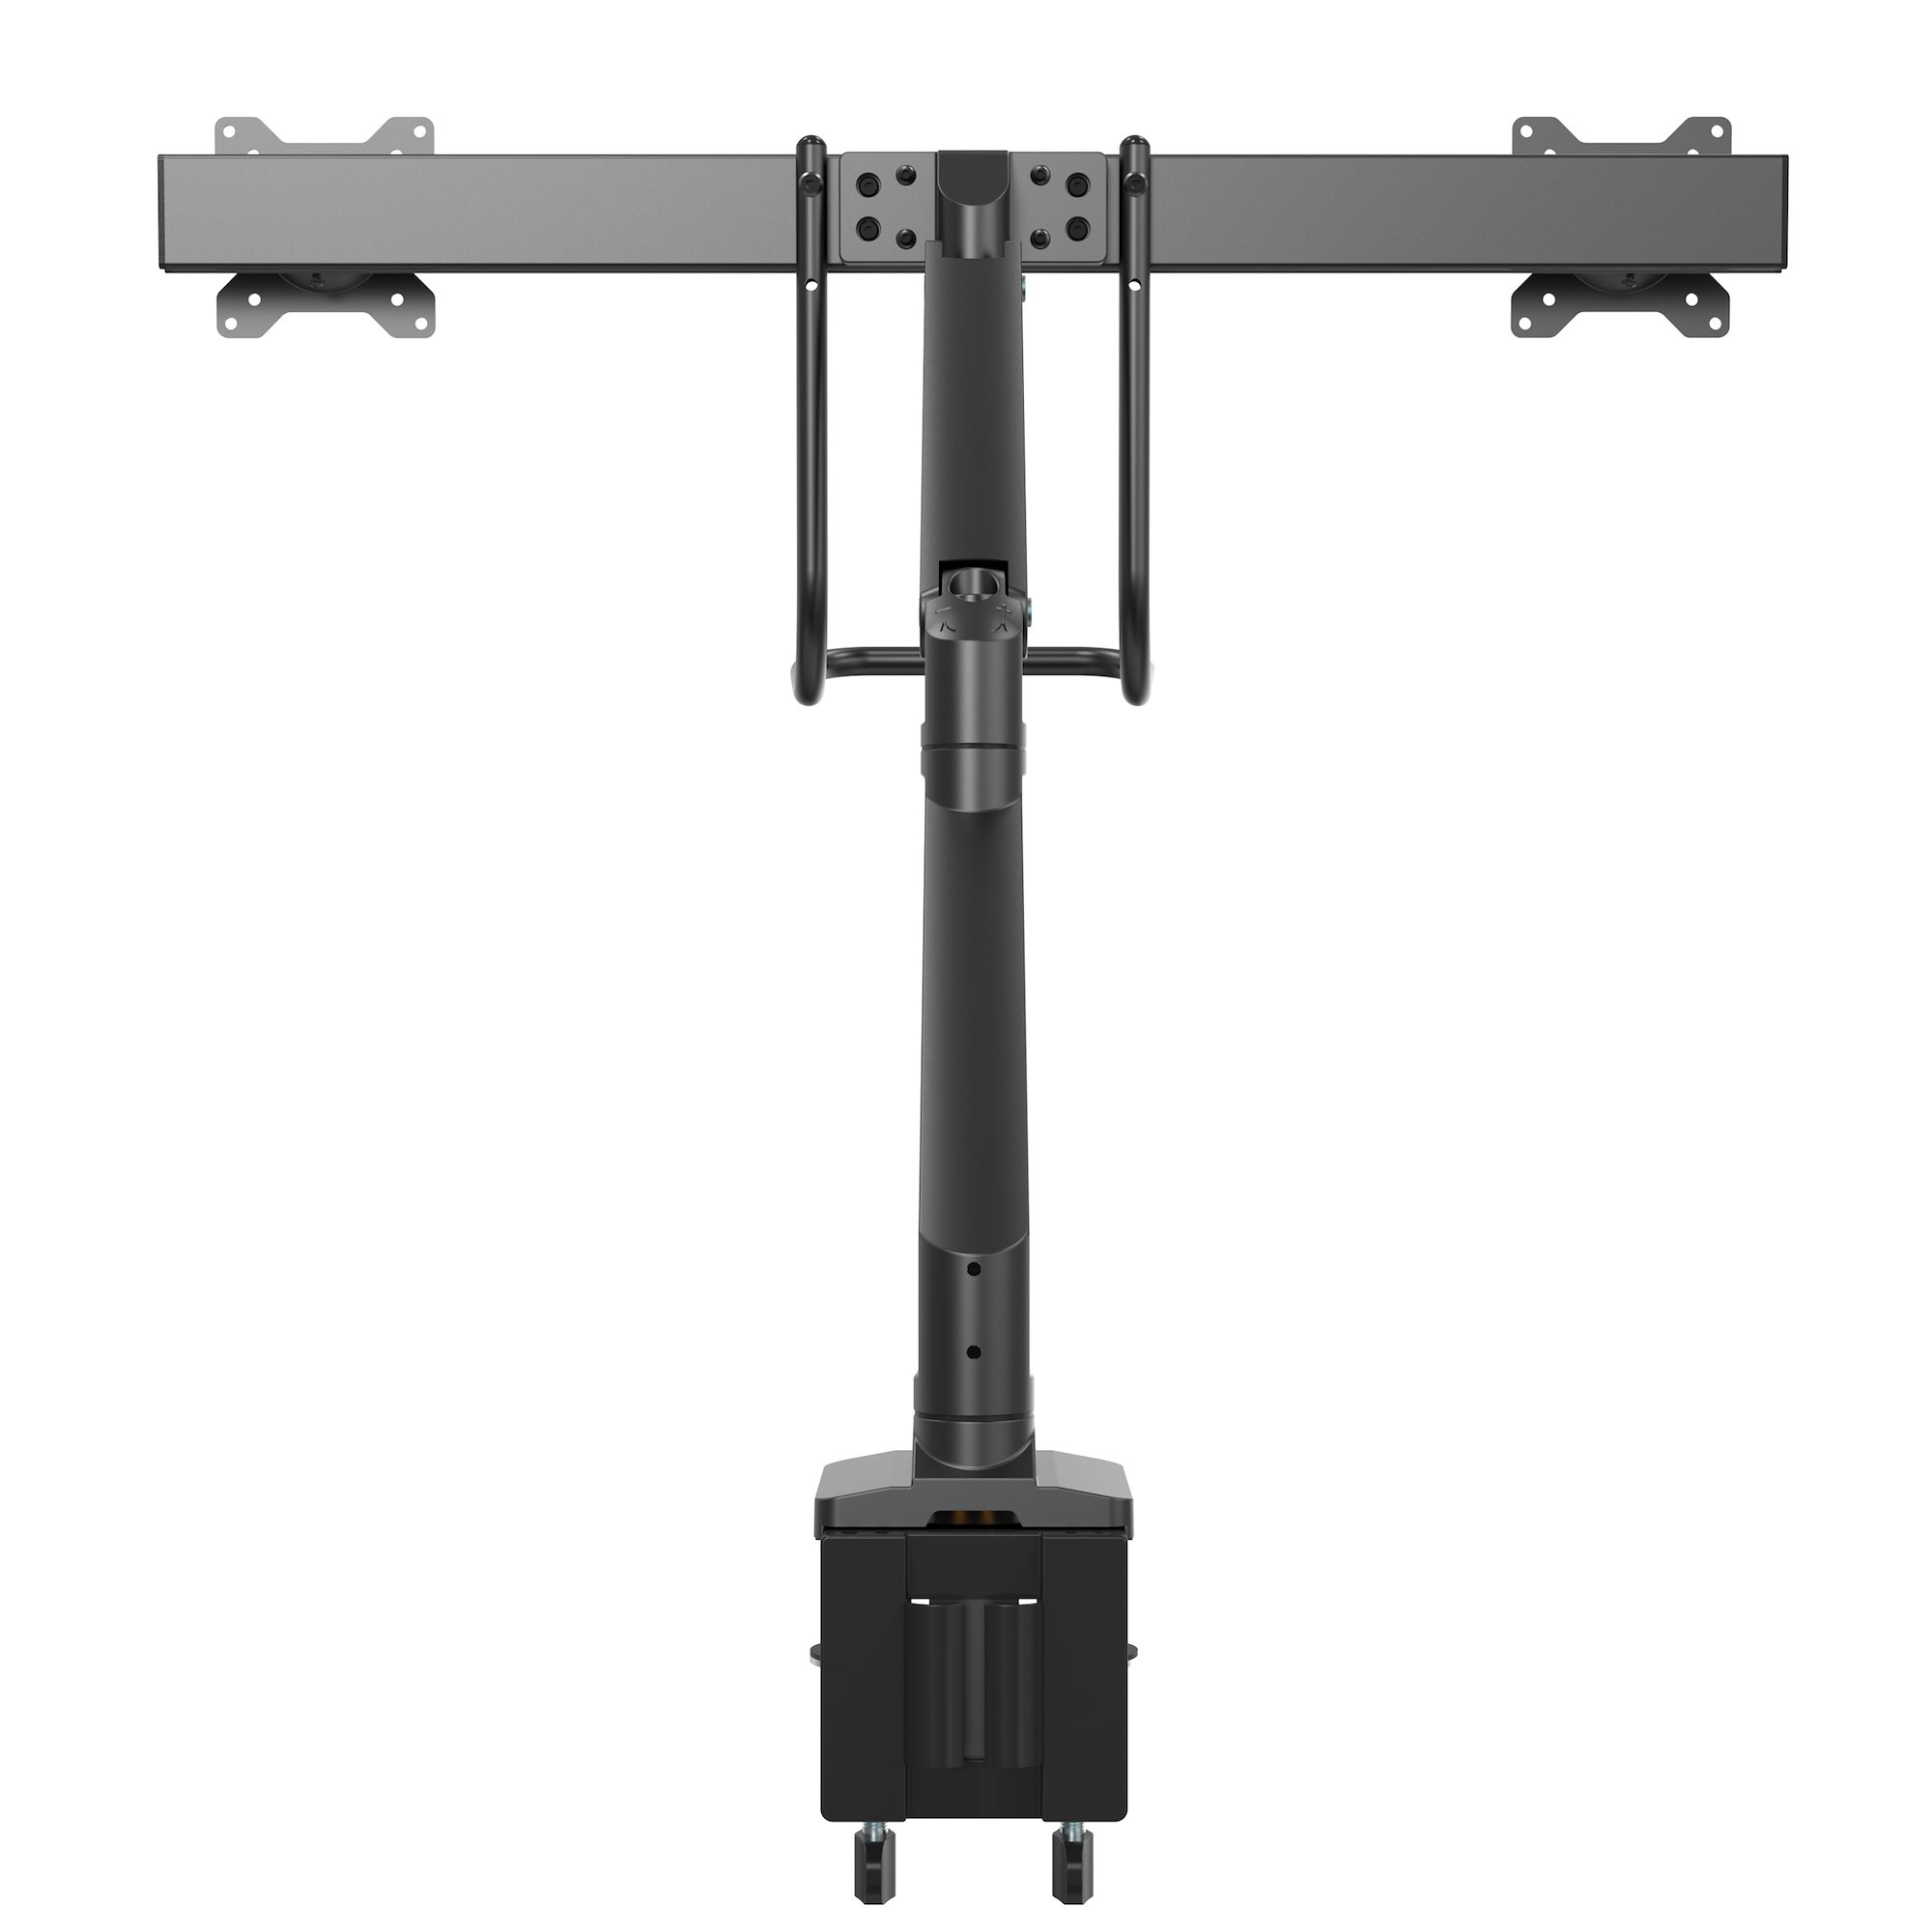 StarTech.com Desk Mount Monitor Arm with 2x USB 3.0 ports, Slim Single  Monitor VESA Mount up to 34 (17.6lb/8kg) Display, C-Clamp/Grommet - VESA  75x75/100x100mm heavy duty single monitor arm for 32in (16:9)